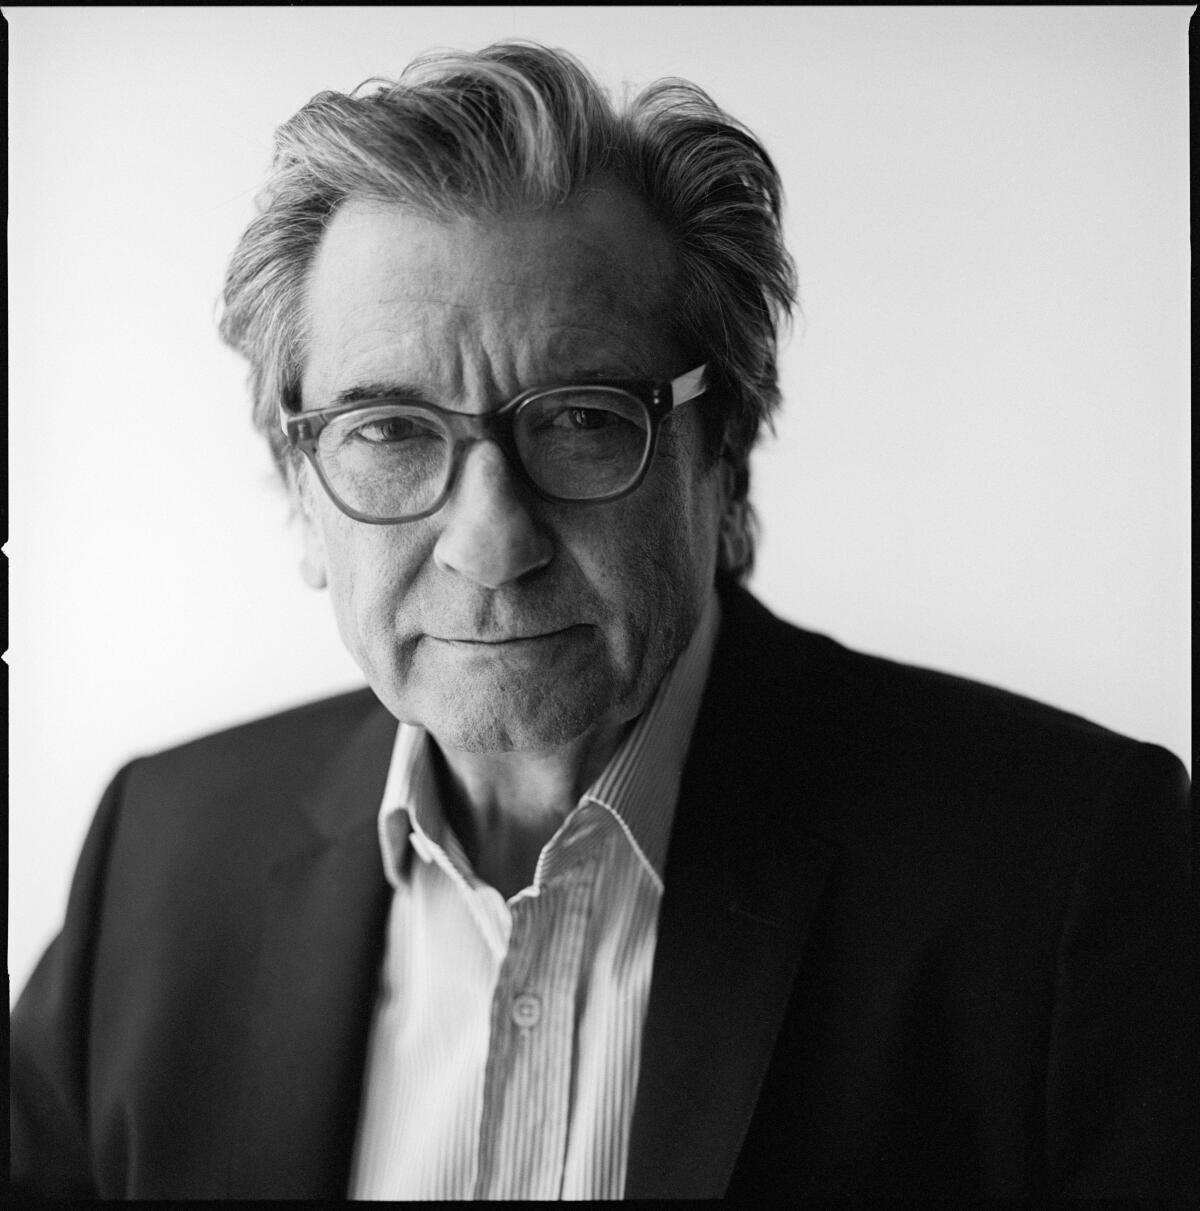 A black-and-white photo portrait of Griffin Dunne looking into the camera